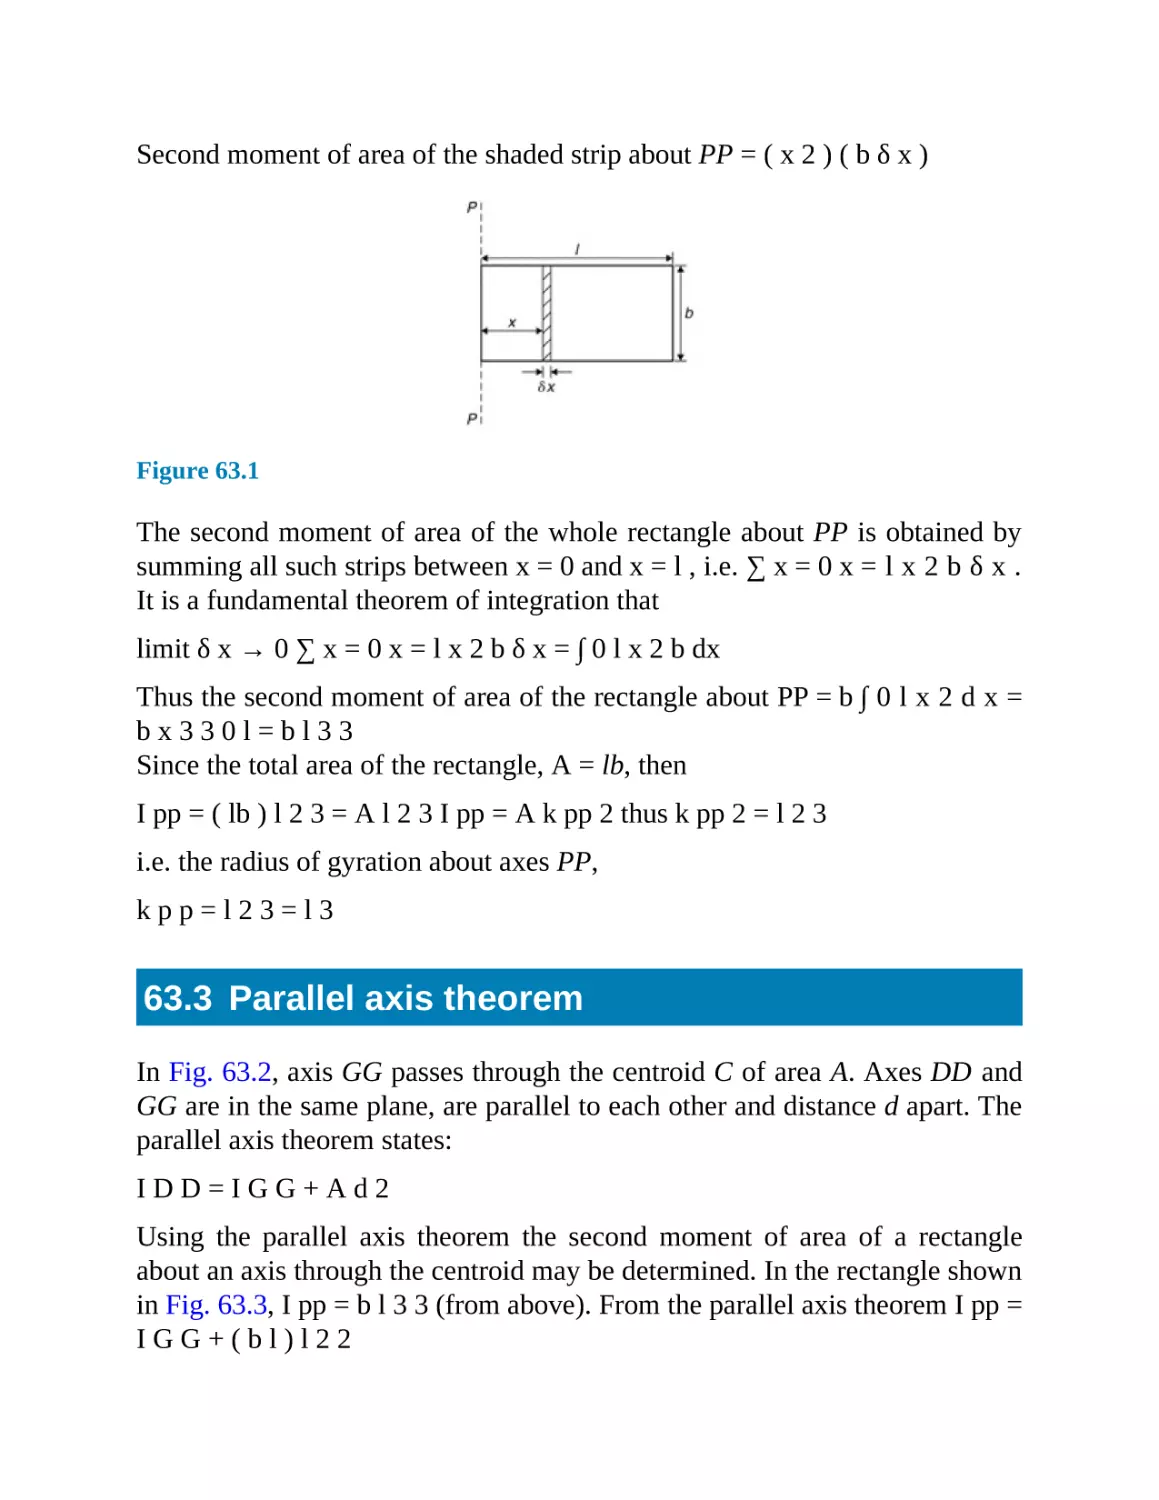 63.3 Parallel axis theorem